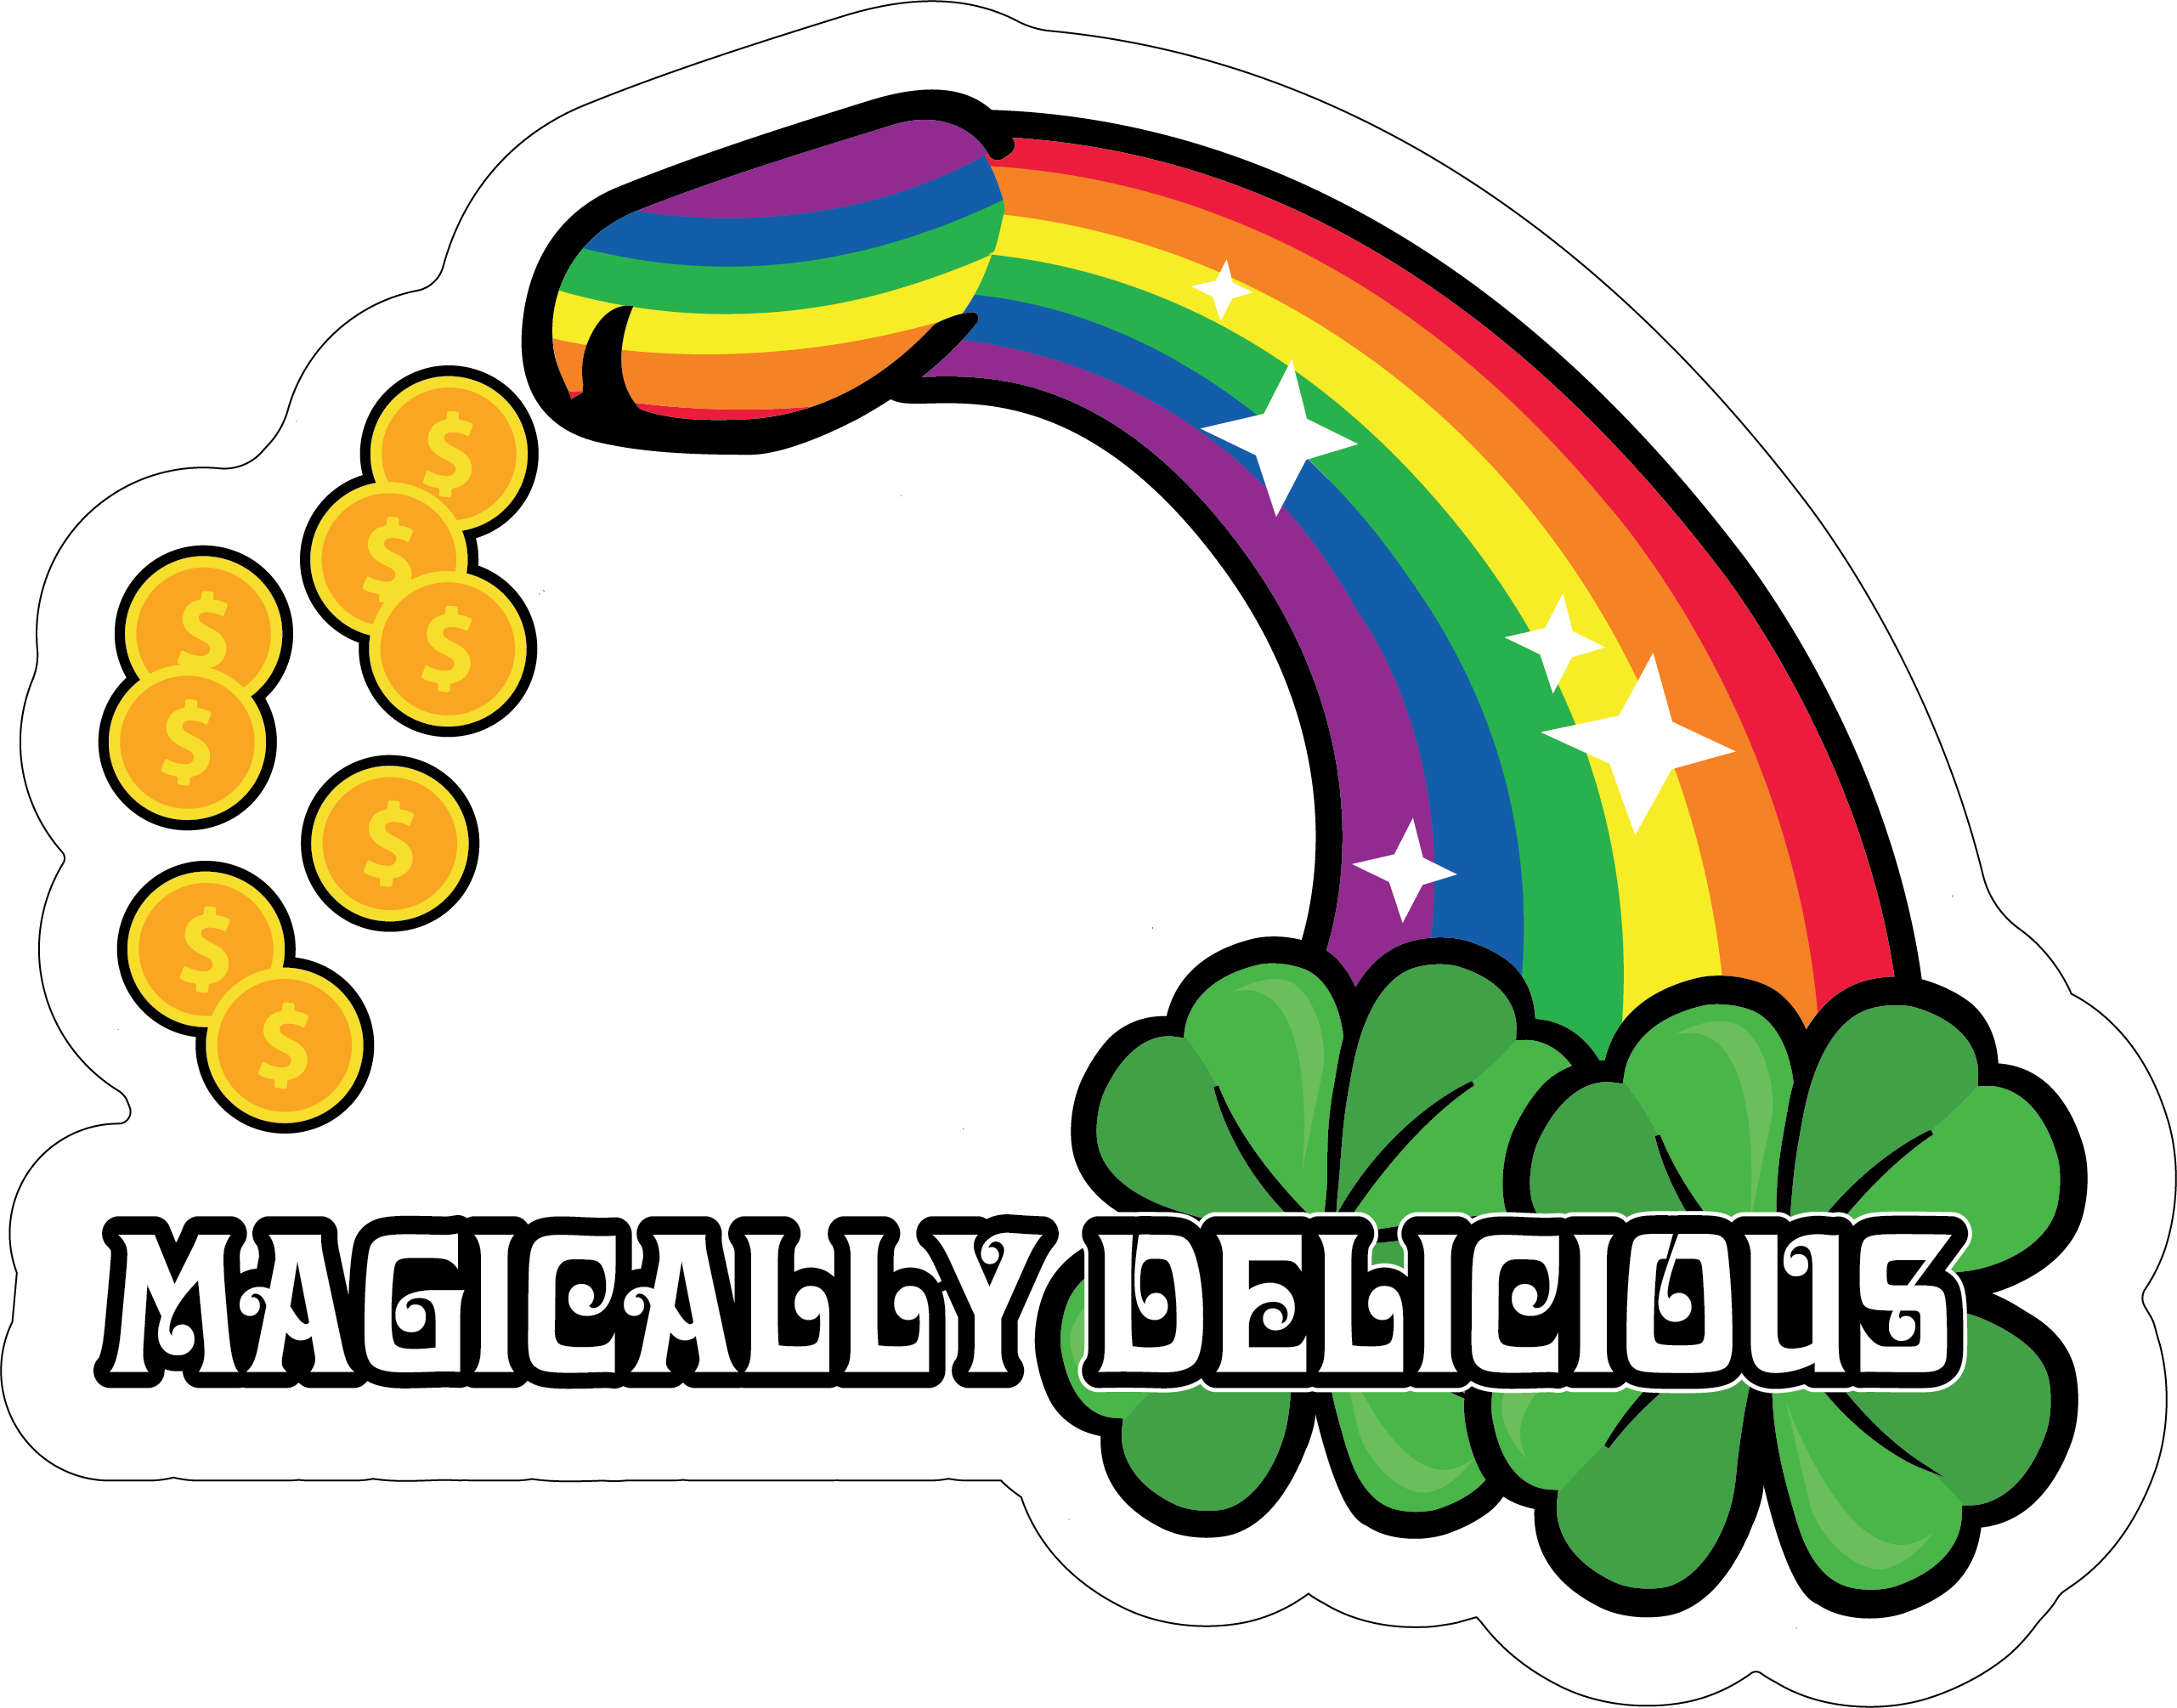 Tactical Gear Junkie Patches Magically Delicious - Printed Vinyl Patch